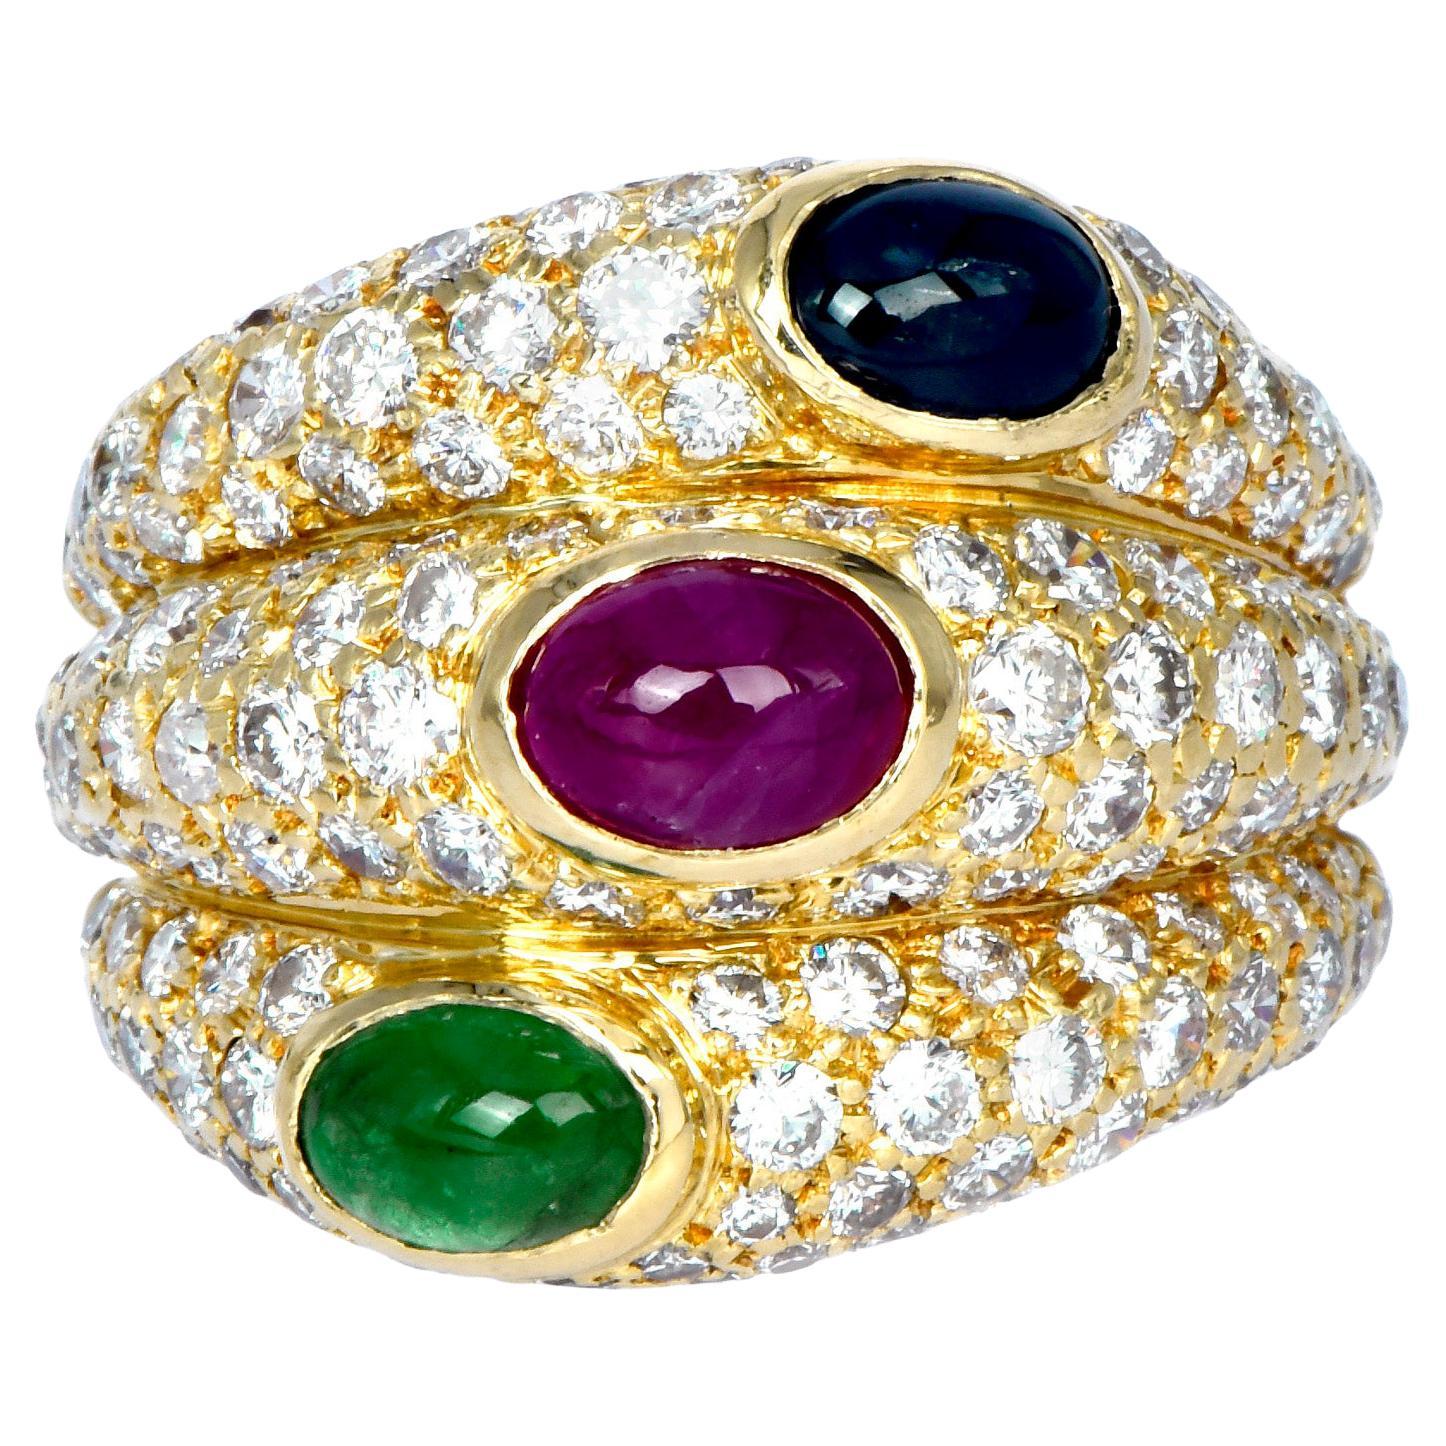 Cartier intricate and defiant design from the 1990s, Crafted in solid 18K yellow gold, with an all-time favorite tri-colors design, by 3 Cabochon oval cut, bezel-set, Genuine Emerald, Ruby & Blue Sapphire, weighing 2.20 carats in total.

Embellished